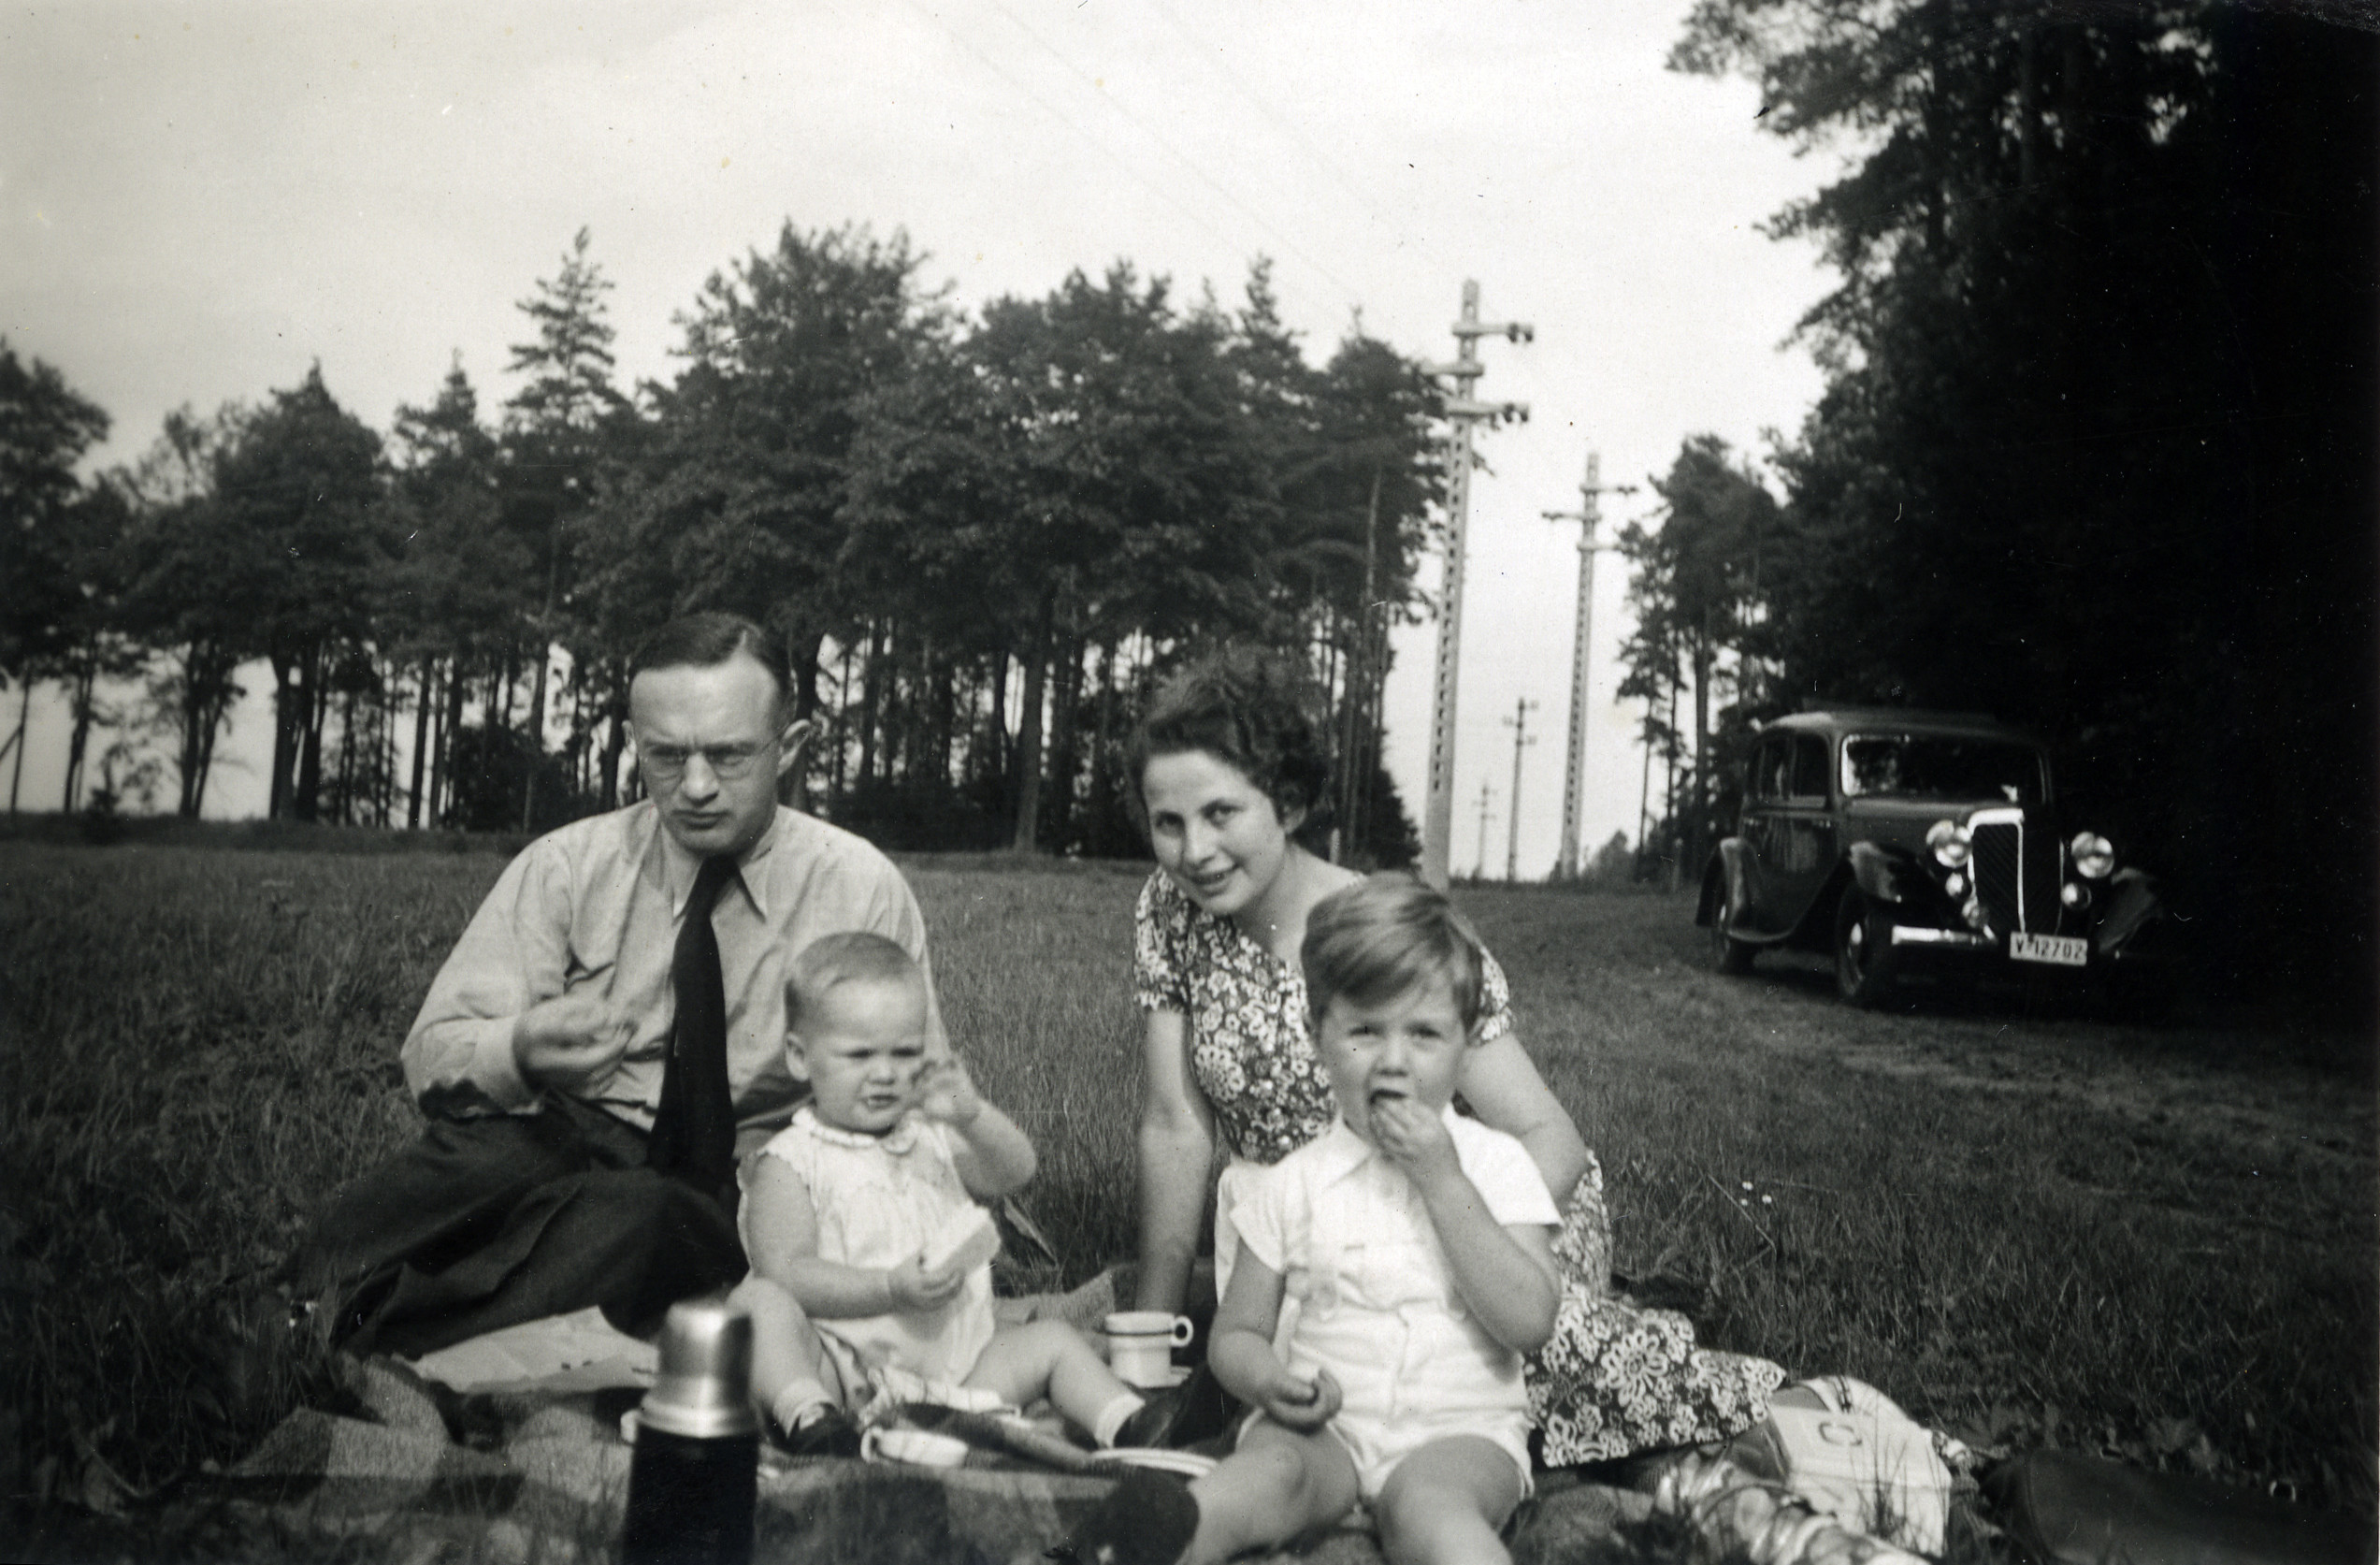 The Spiro family gathers for a picnic in the countryside.

Pictured are Georg and  Esbeth Spiro with their children, Shoshana and Shimon.